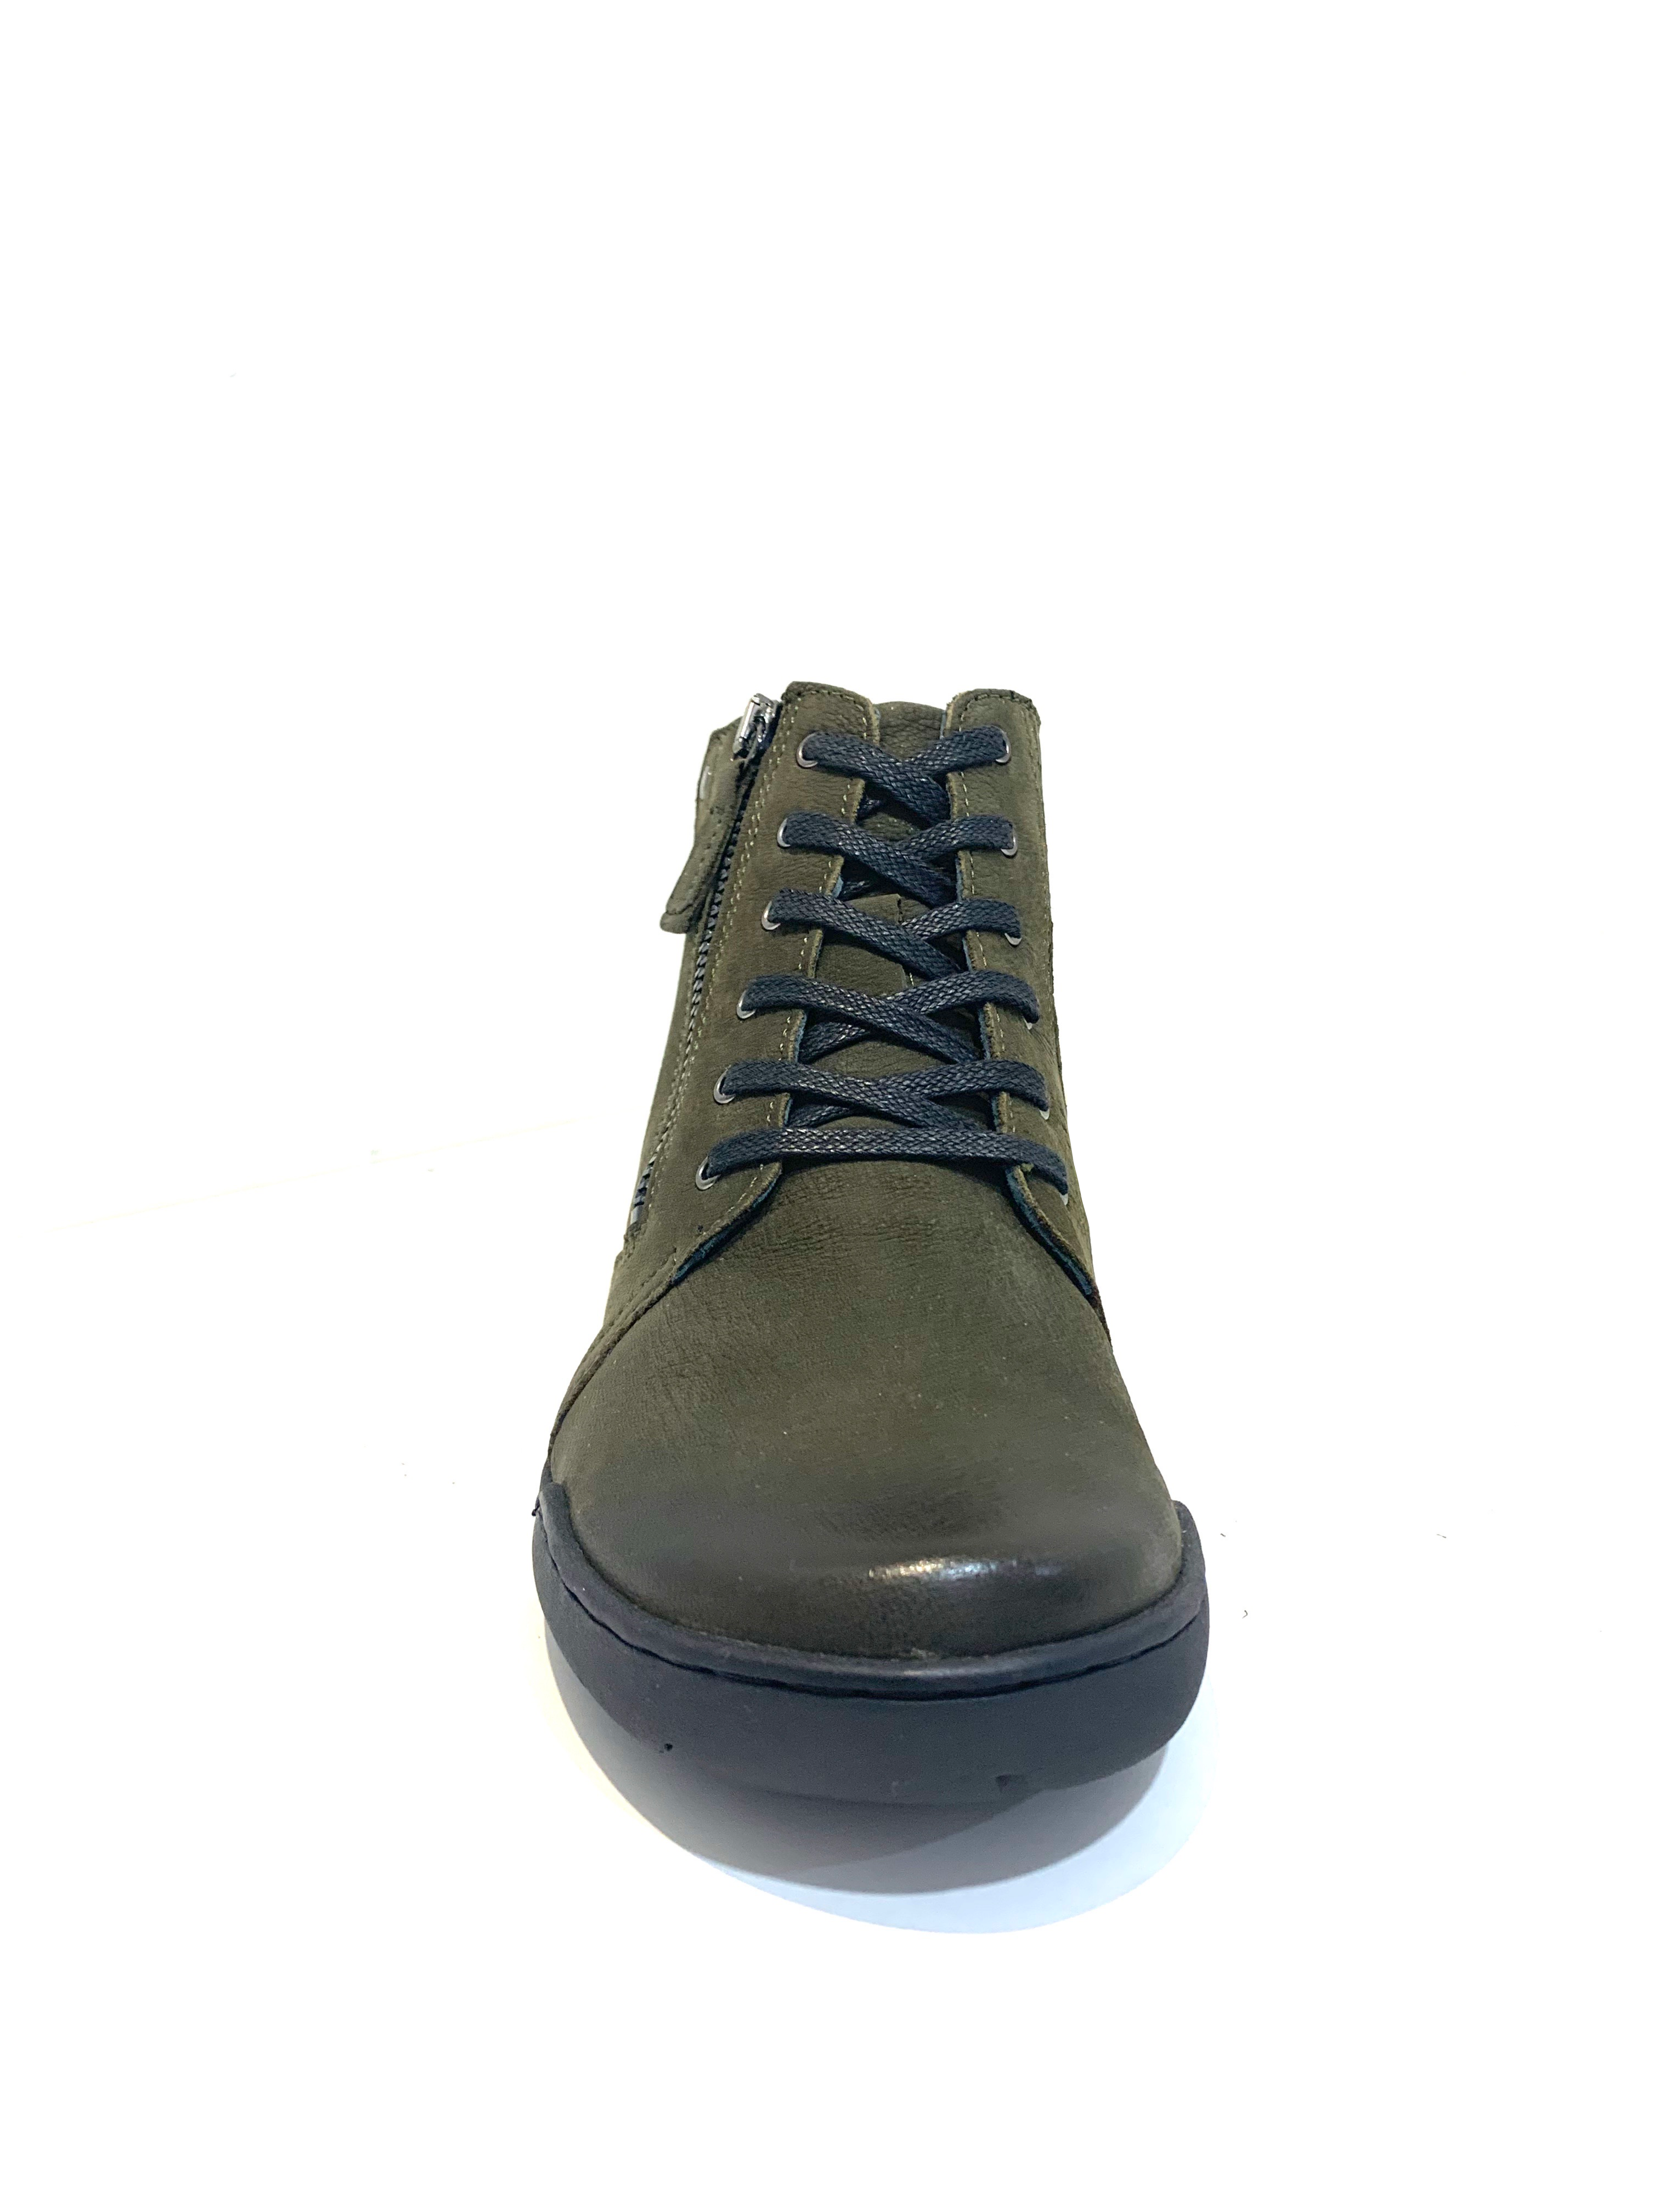 Relax 290-104 Loden Olive Green Lace Up Zip Ankle Made In Bosnia